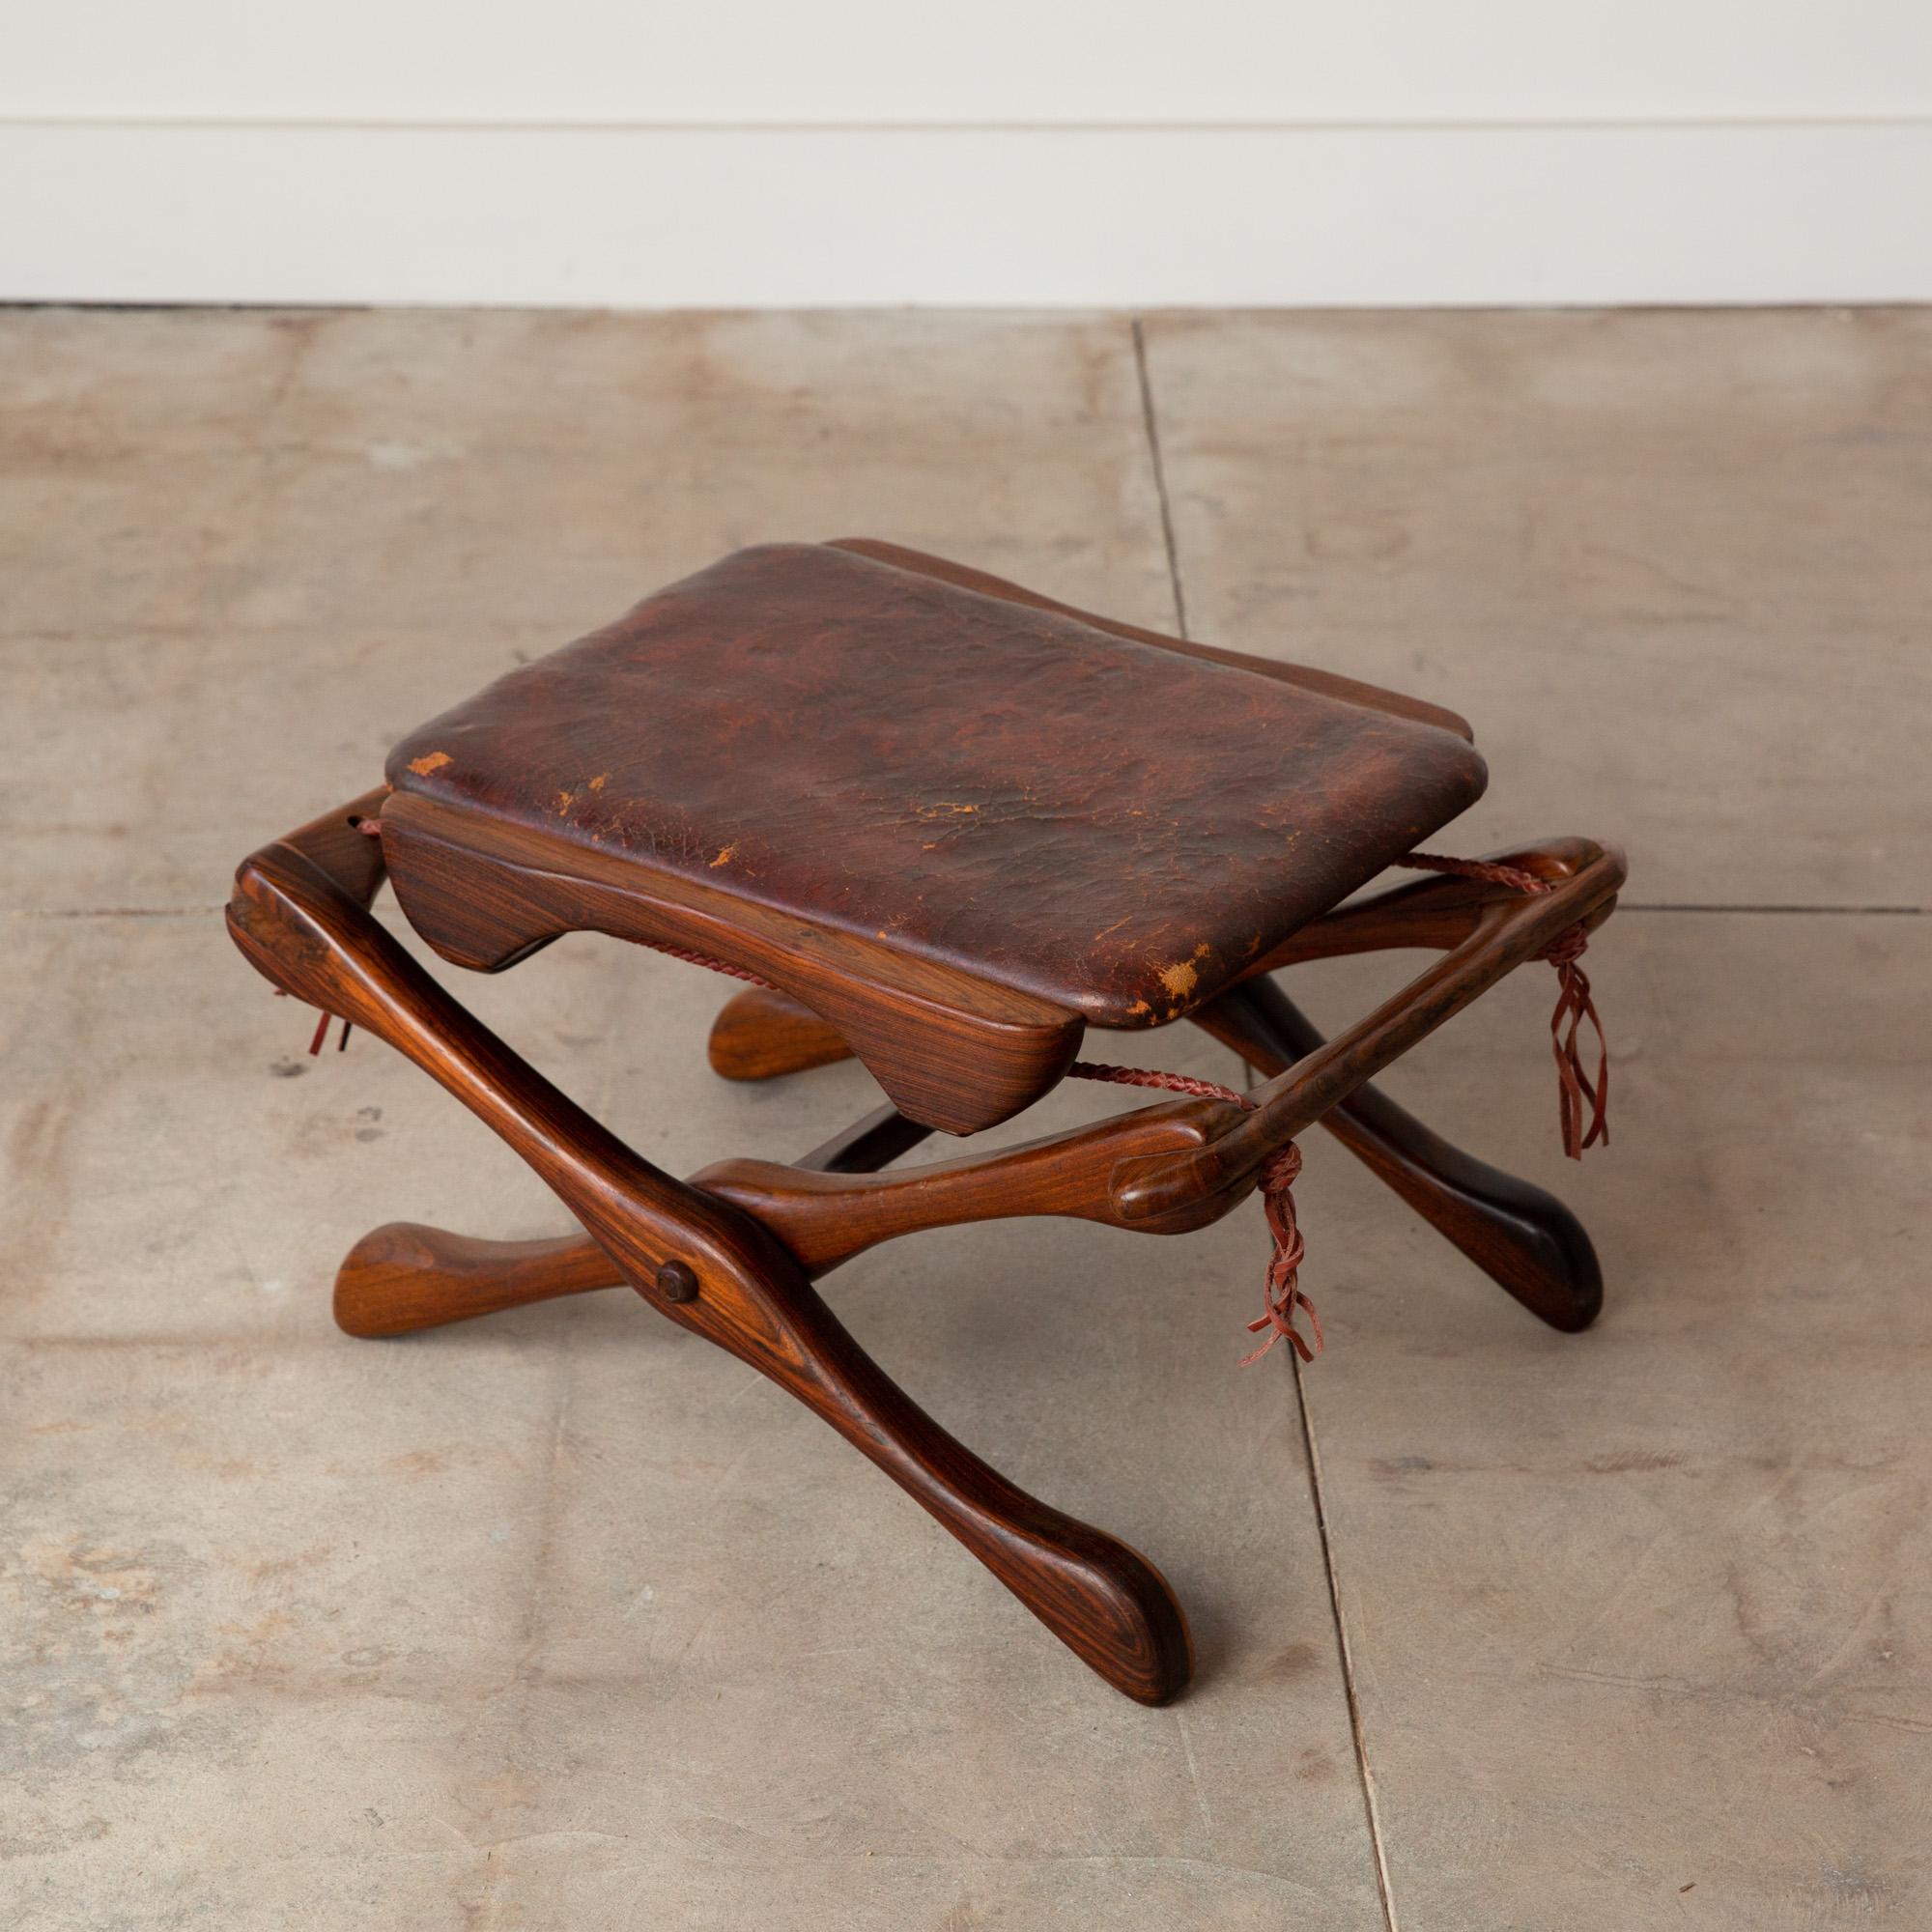 Modern Don Shoemaker for Señal Folding Stool with Leather Seat